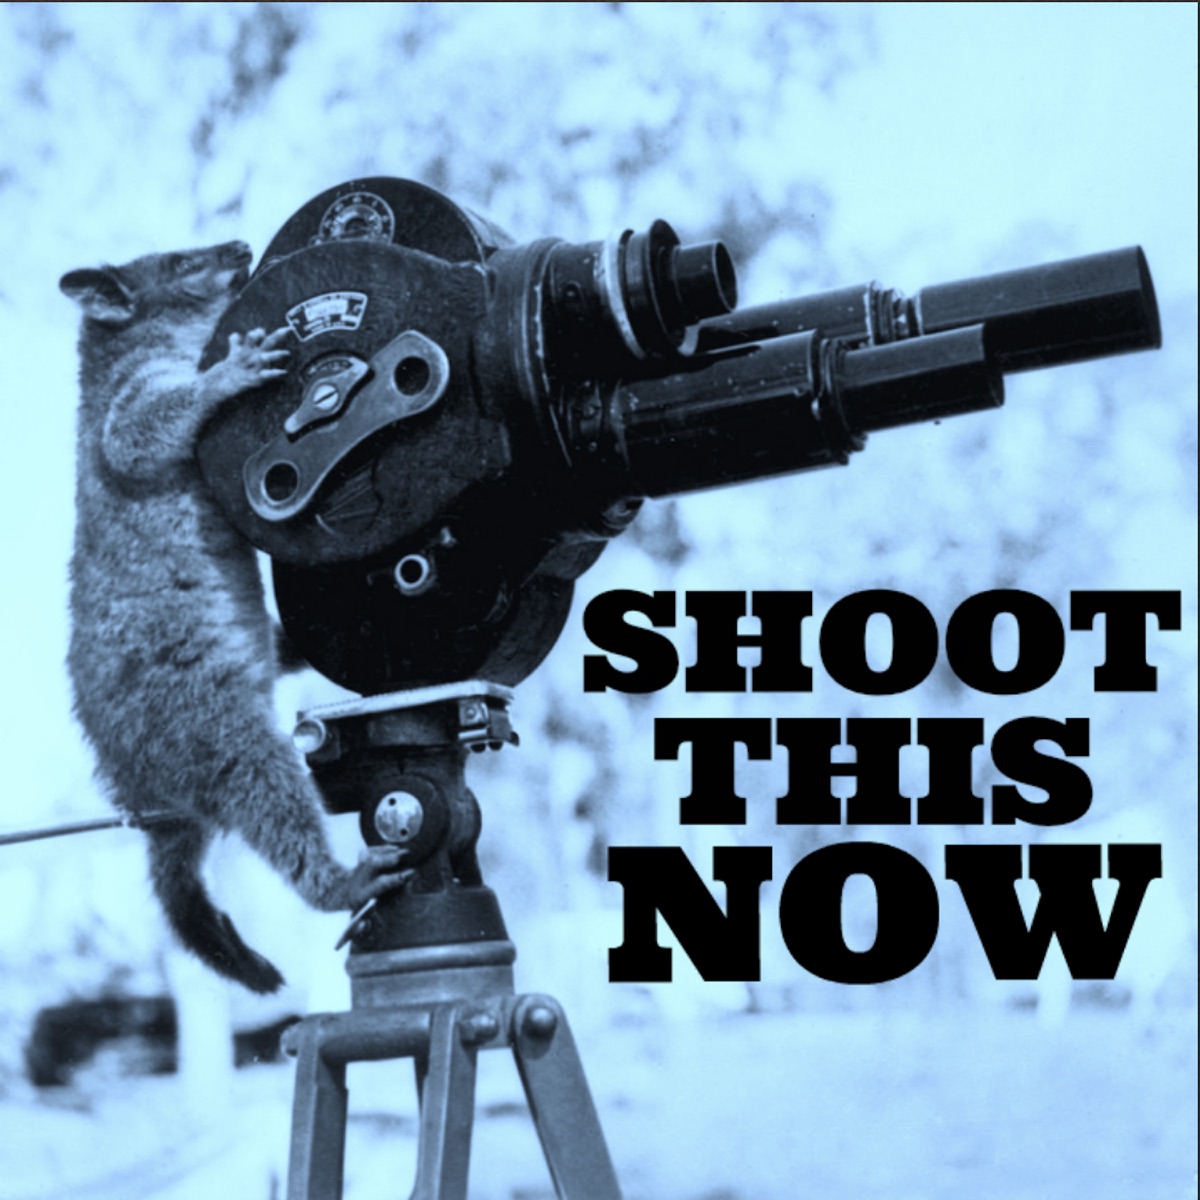 Nudist In The Desert - The Barry Rothbart Nudist Videographer Story â€“ Shoot This Now â€“ Podcast â€“  Podtail